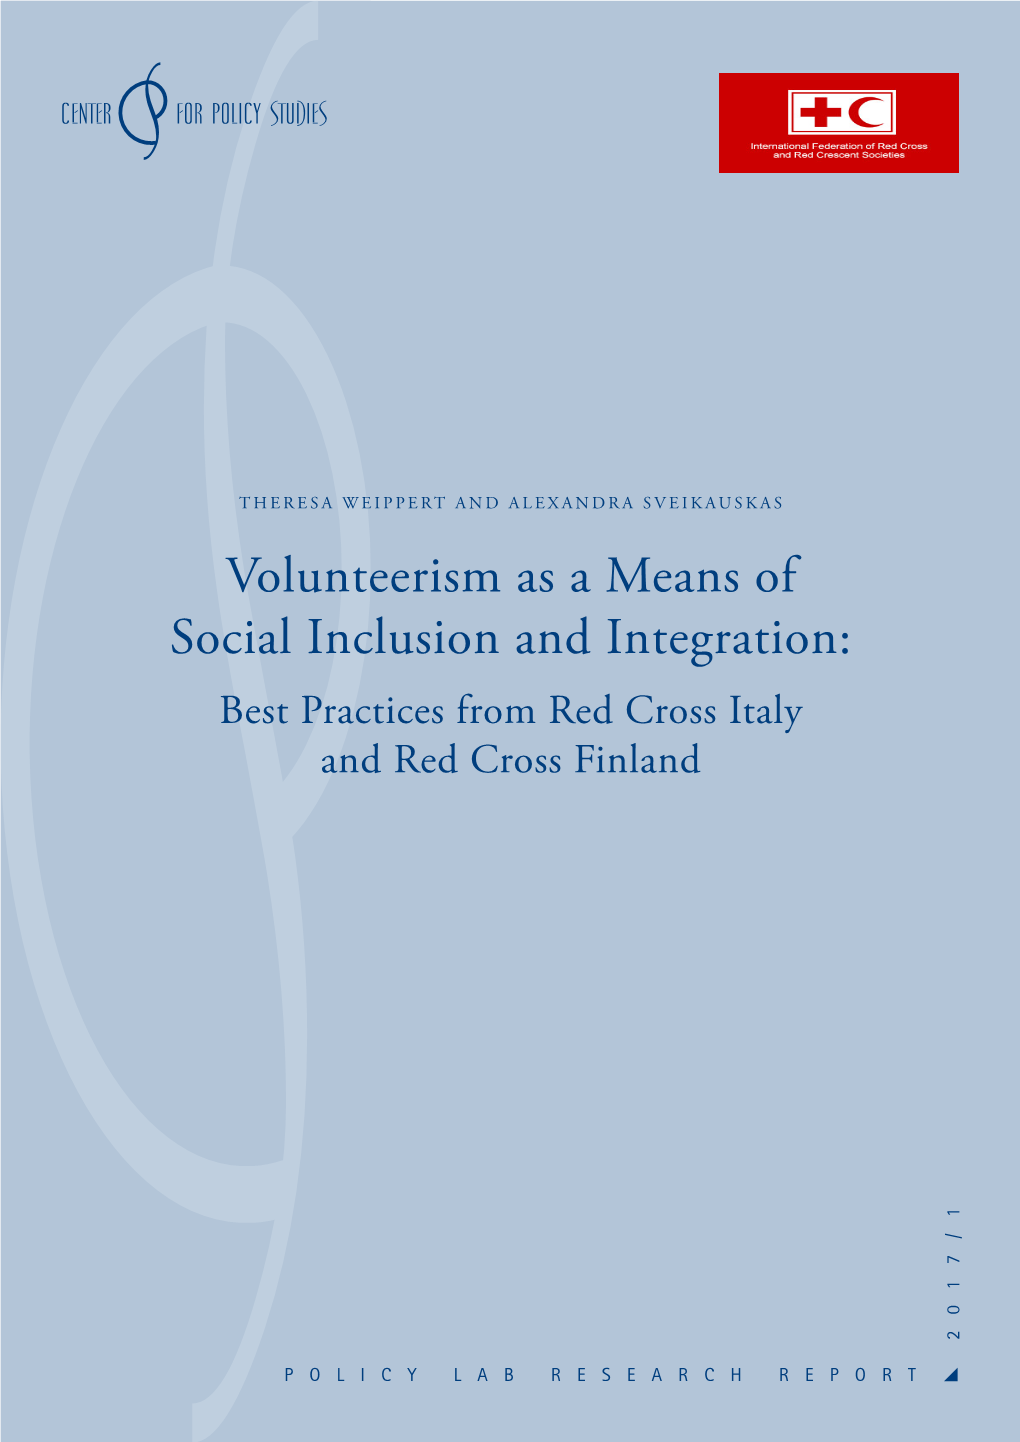 Volunteerism As a Means of Social Inclusion and Integration: Best Practices from Red Cross Italy and Red Cross Finland 2017/1